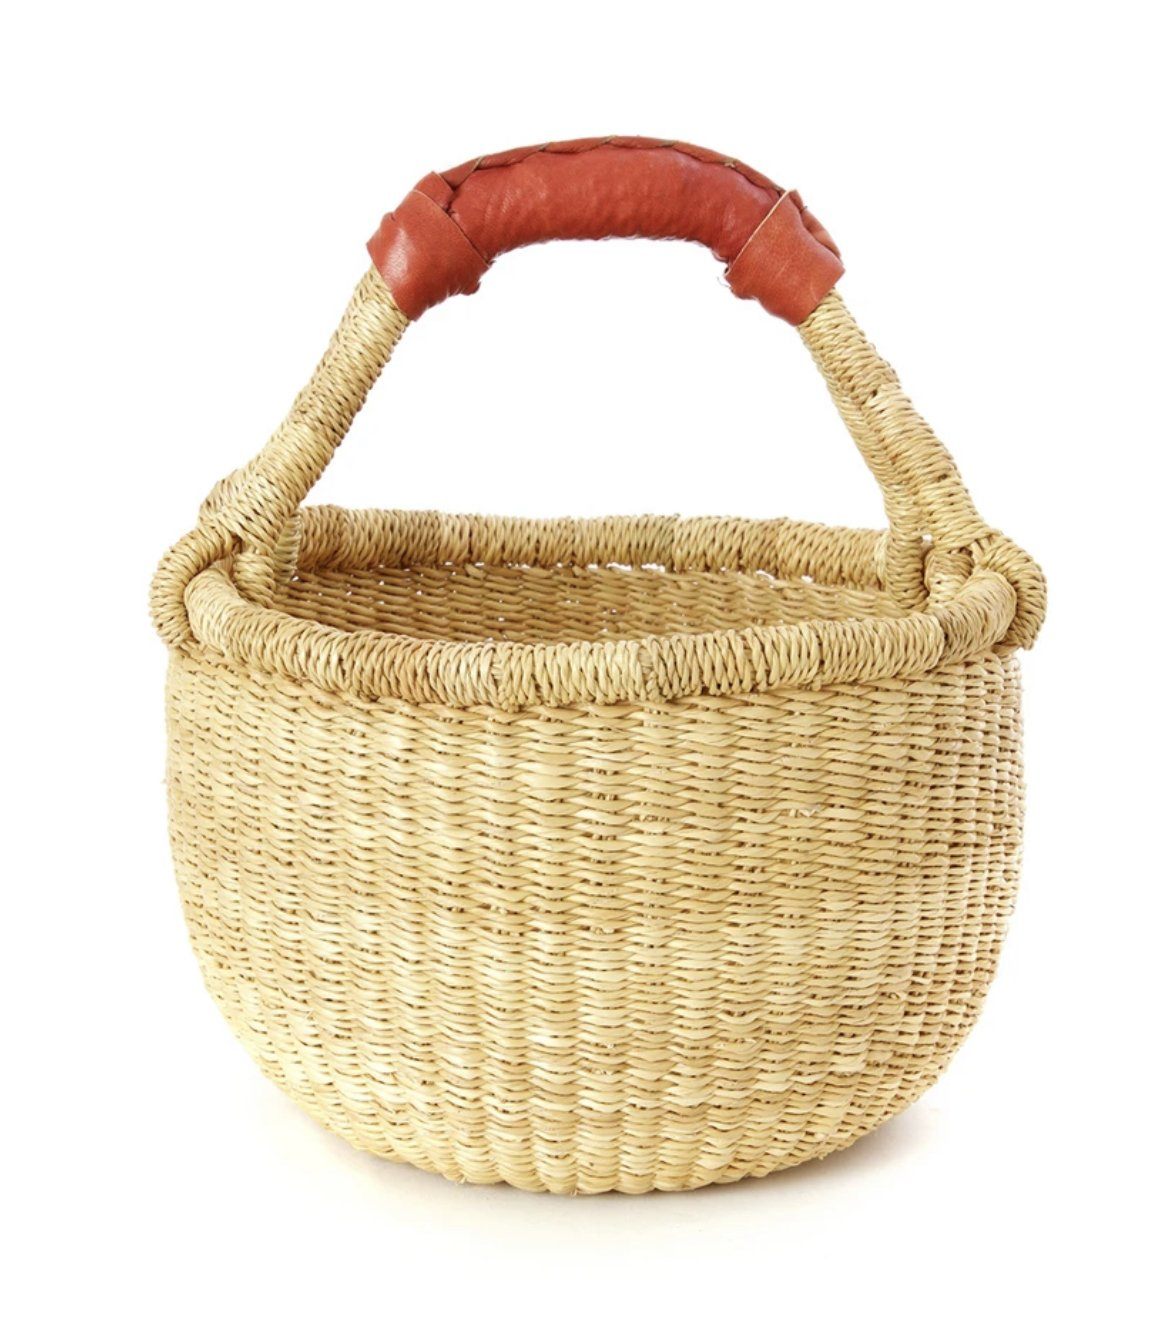 Baby Bolga Basket view with brown leather handle wrap - Alder & Alouette